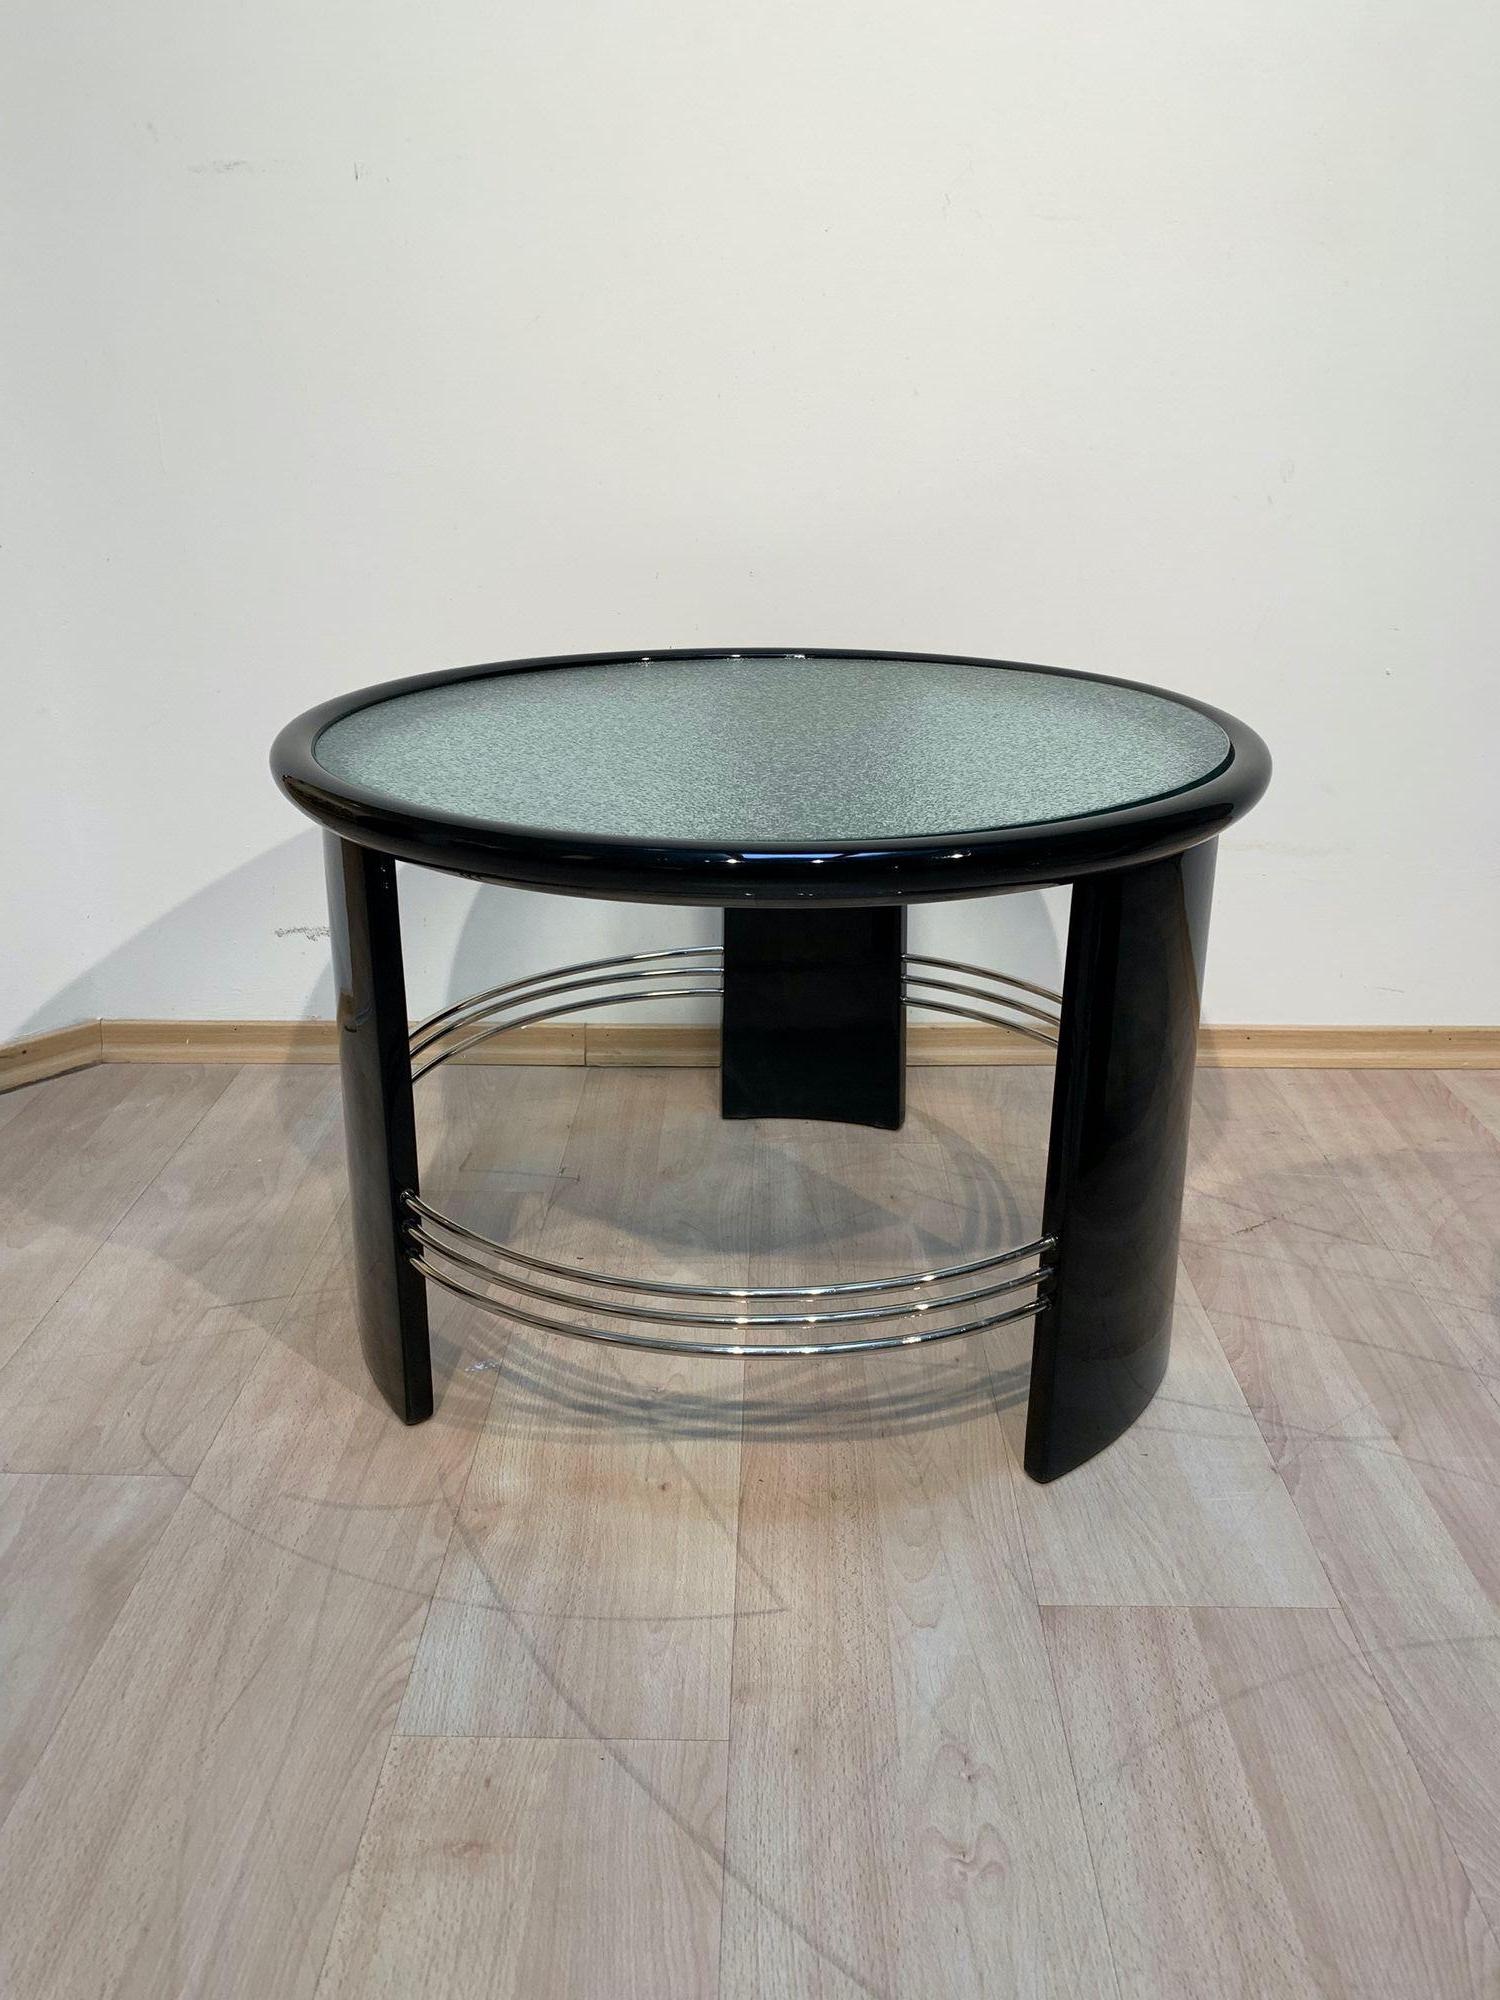 French Art Deco Round Coffee Table, Black Lacquer, Chrome, Glass, France circa 1930 For Sale